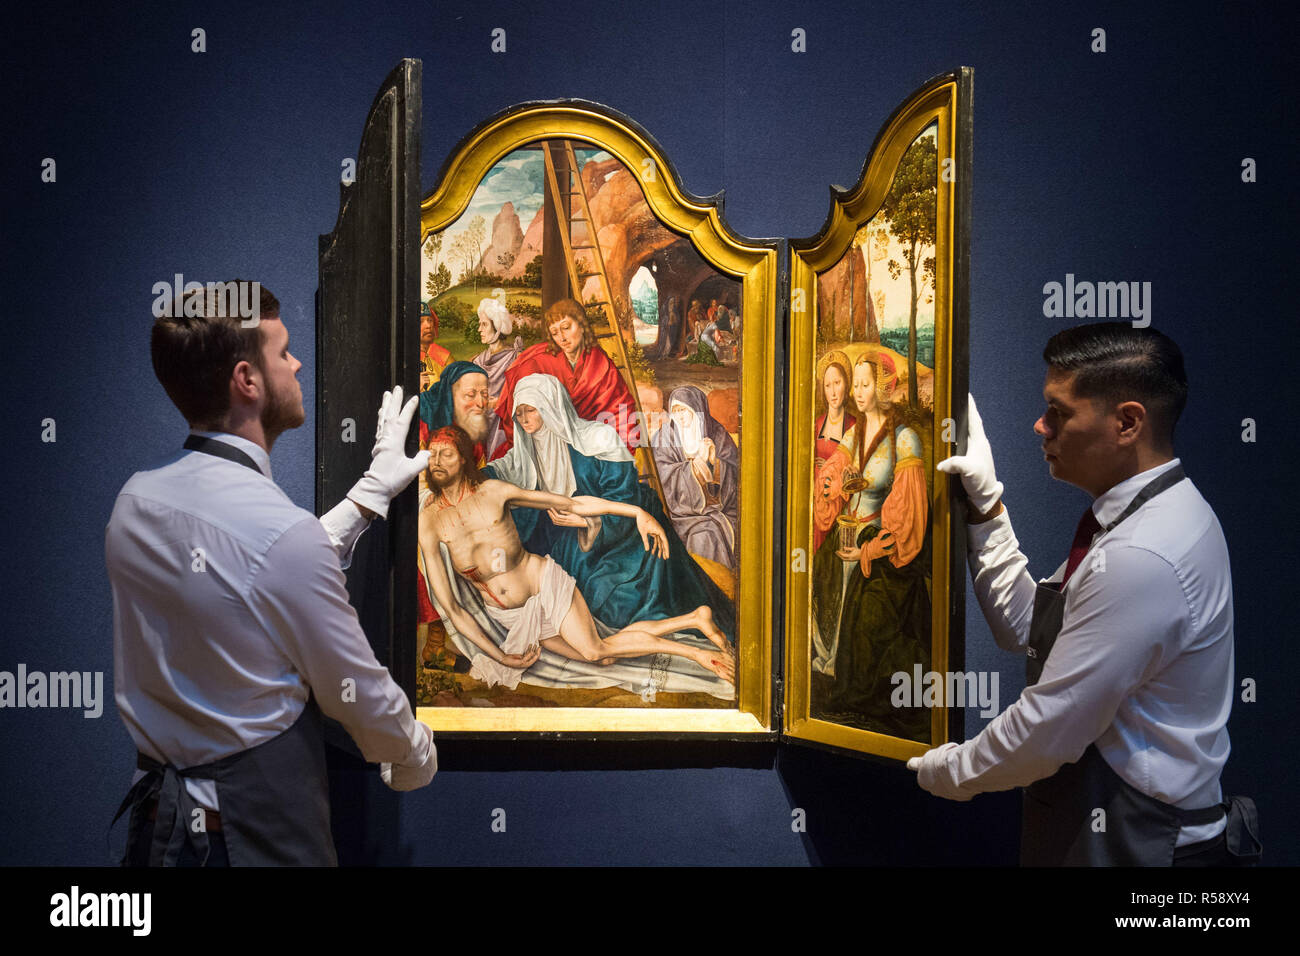 Christie's art handlers with a triptych painting from the Antwerp School, dated circa 1500-1550, valued at £250,000 - £350,000, on show at Christie's saleroom in central London ahead of the auction house's forthcoming Classic Week sales. Stock Photo